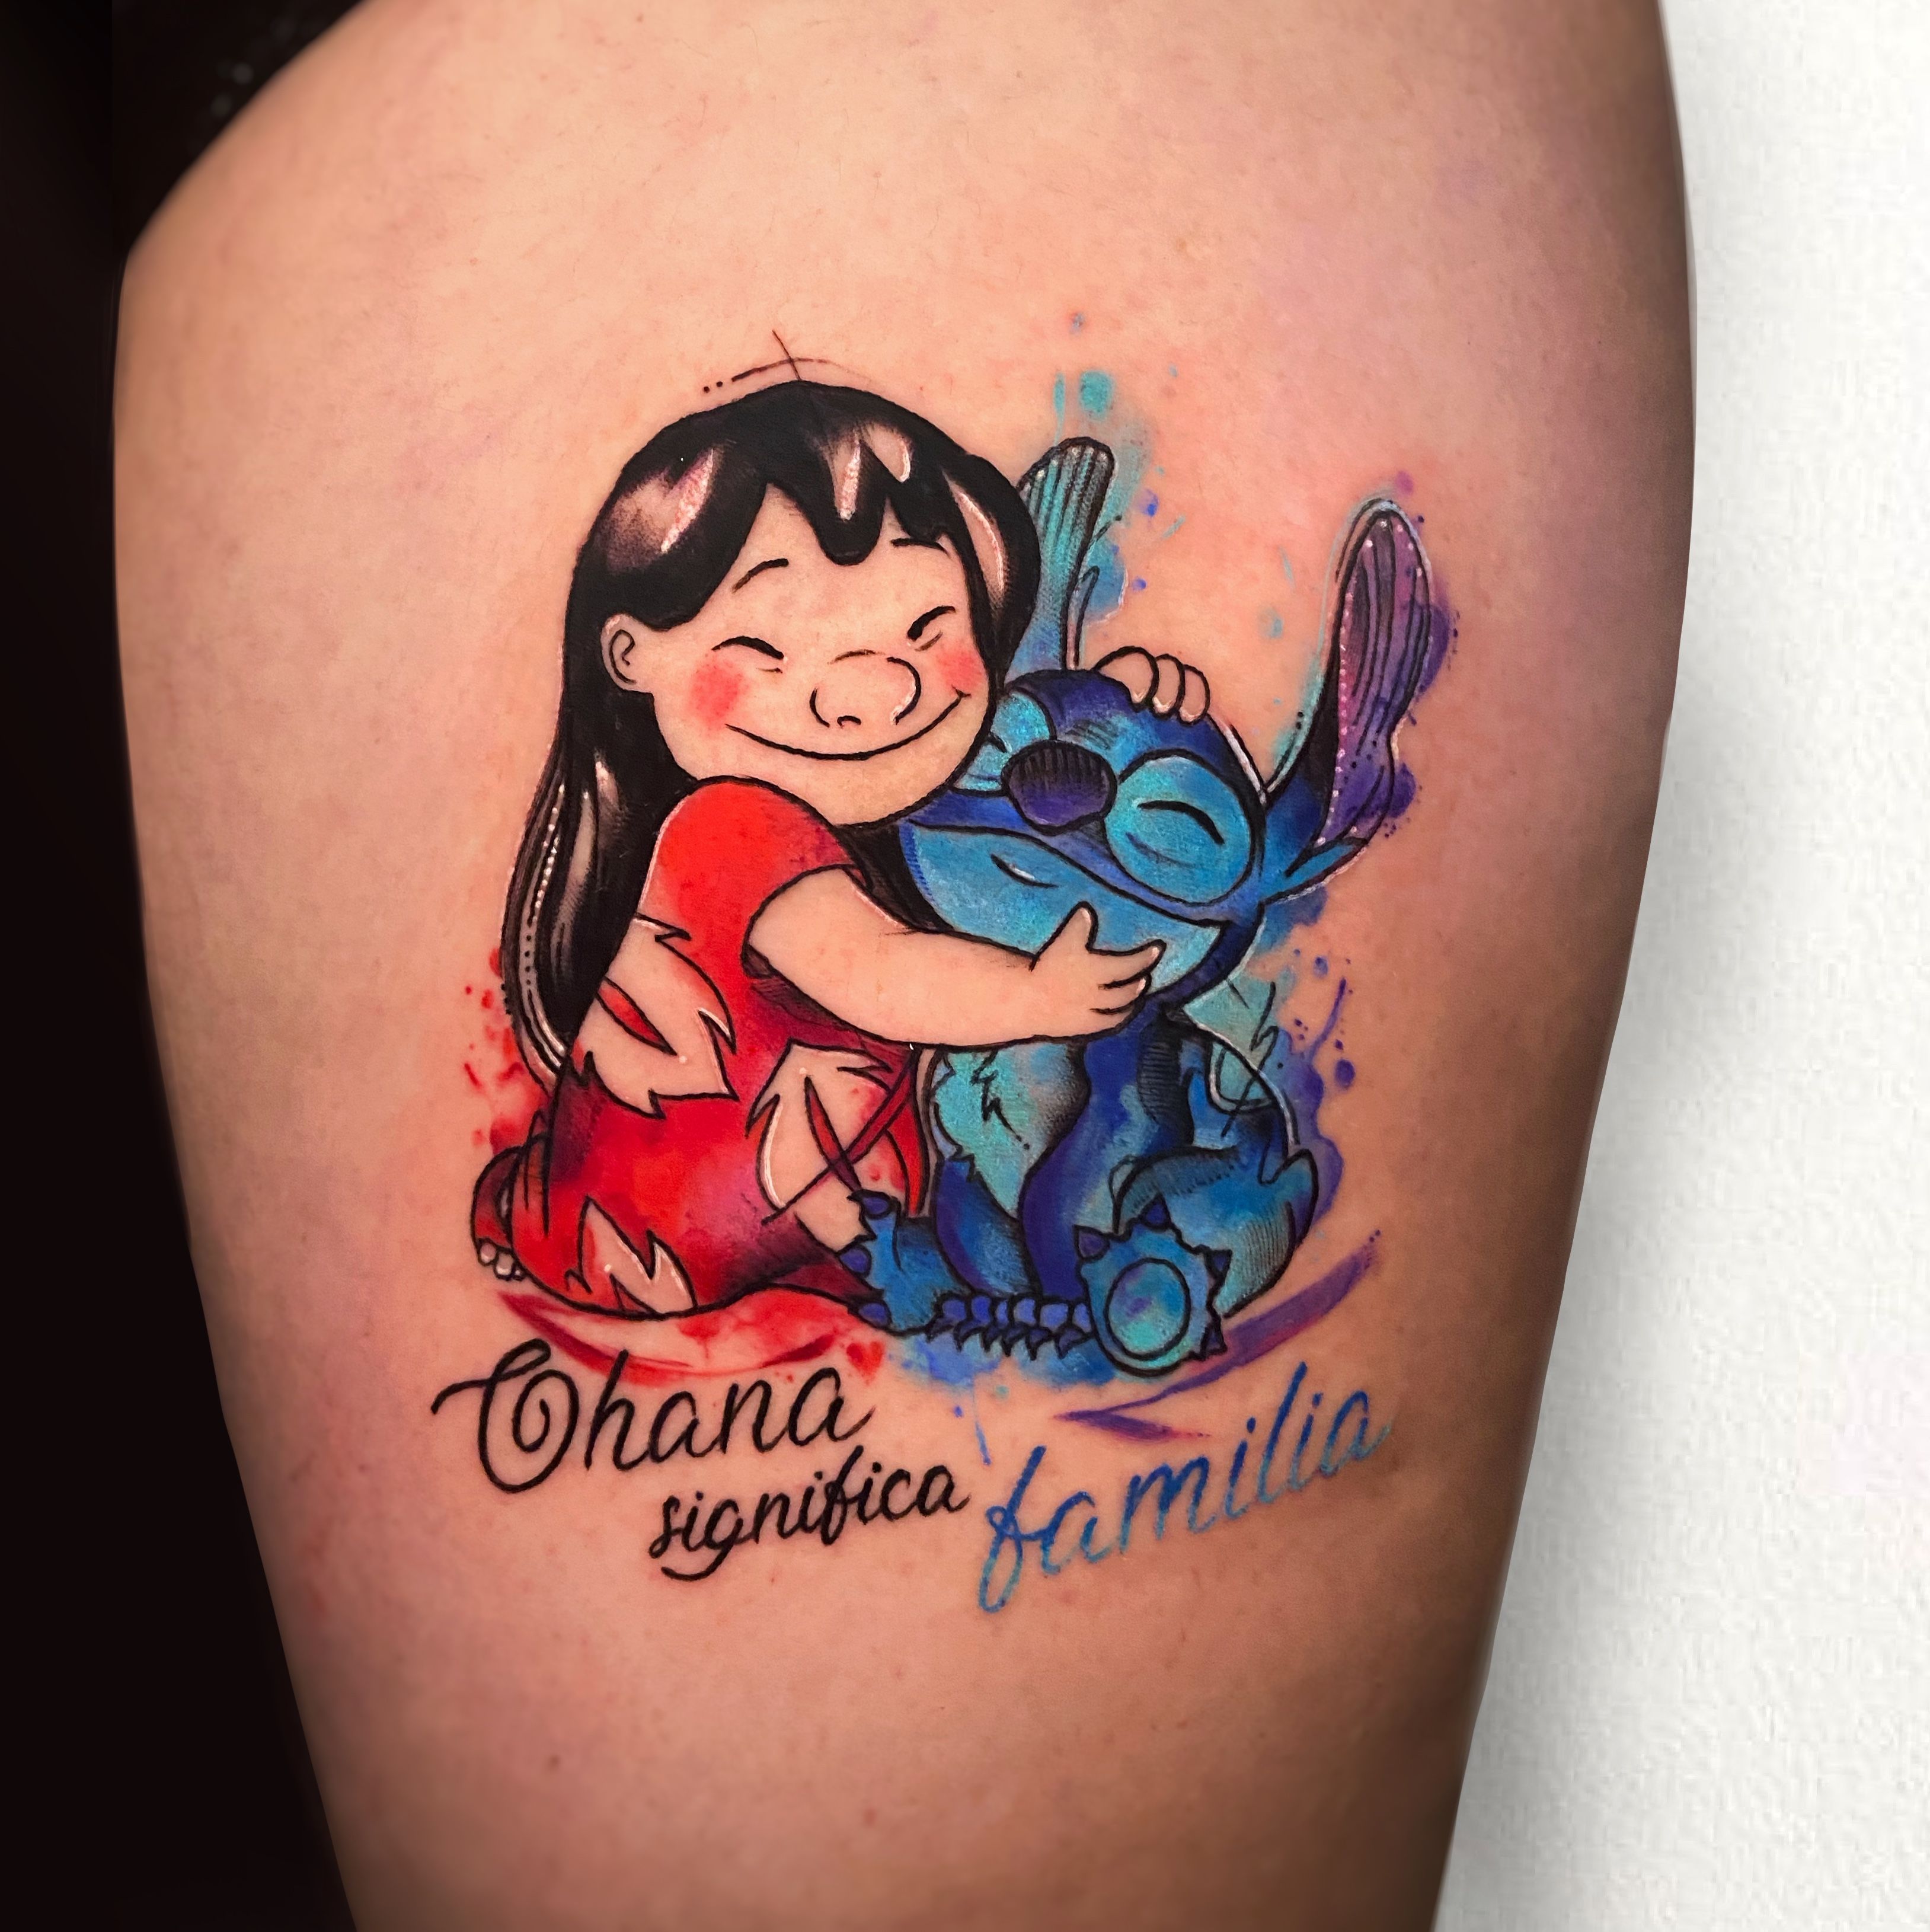 Urban Monkey Tattoo - LILO and stitch design on the calf by Nick | Facebook